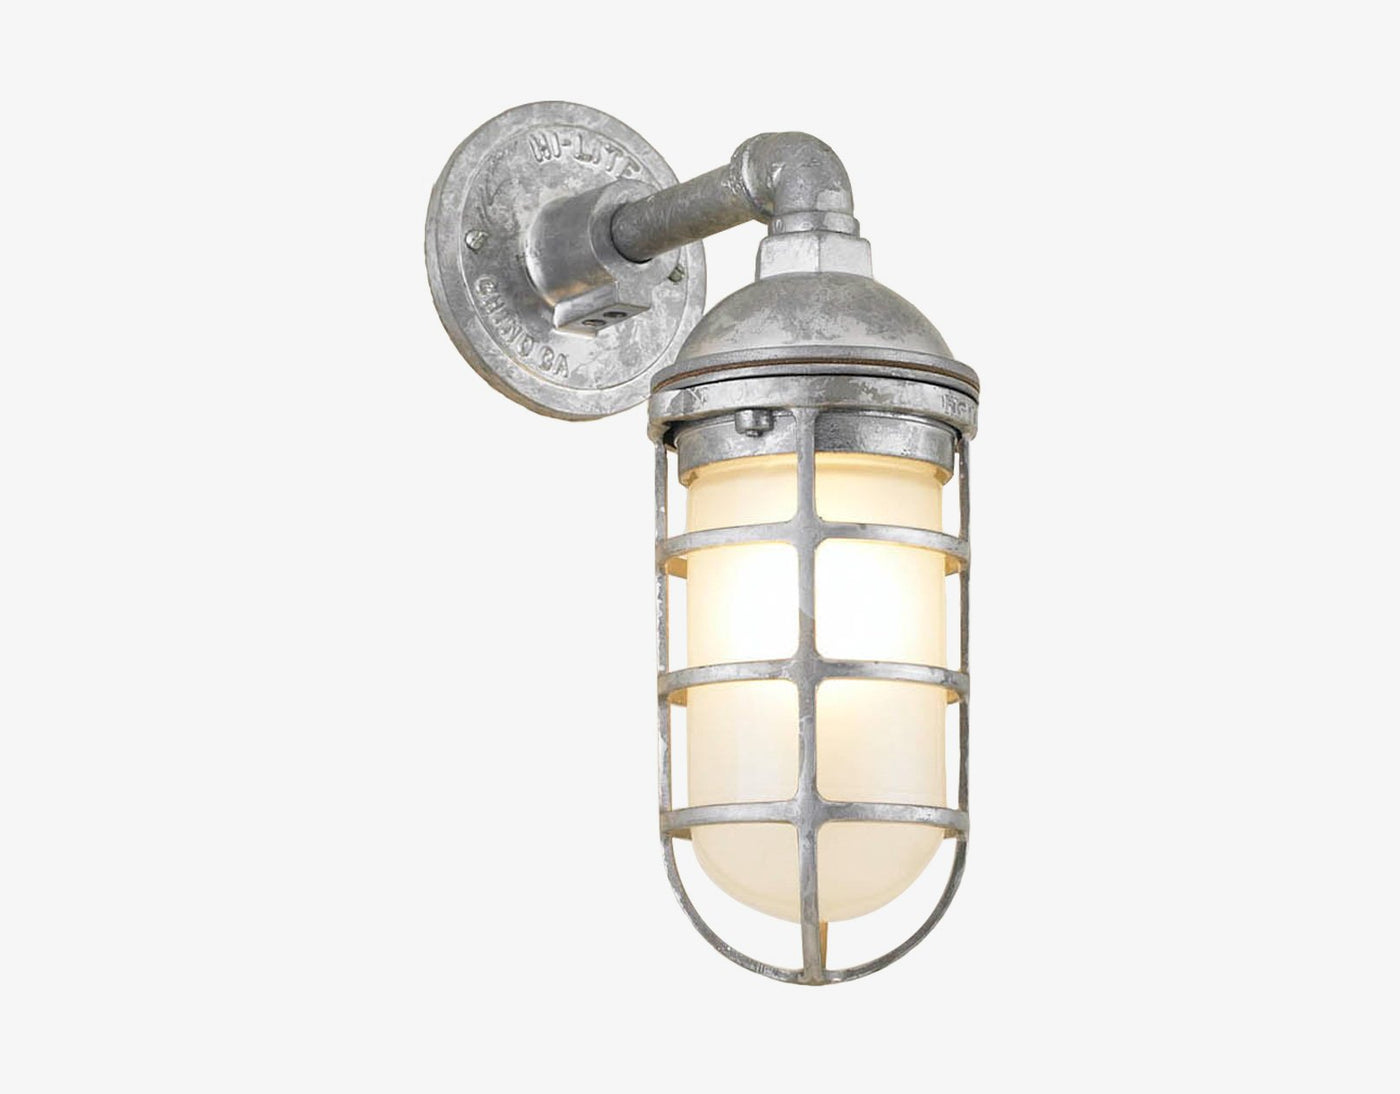 Hi-Lite Saucer Vapor Tight Jar Sconce - Galvanized/Standard (shown with frosted glass)